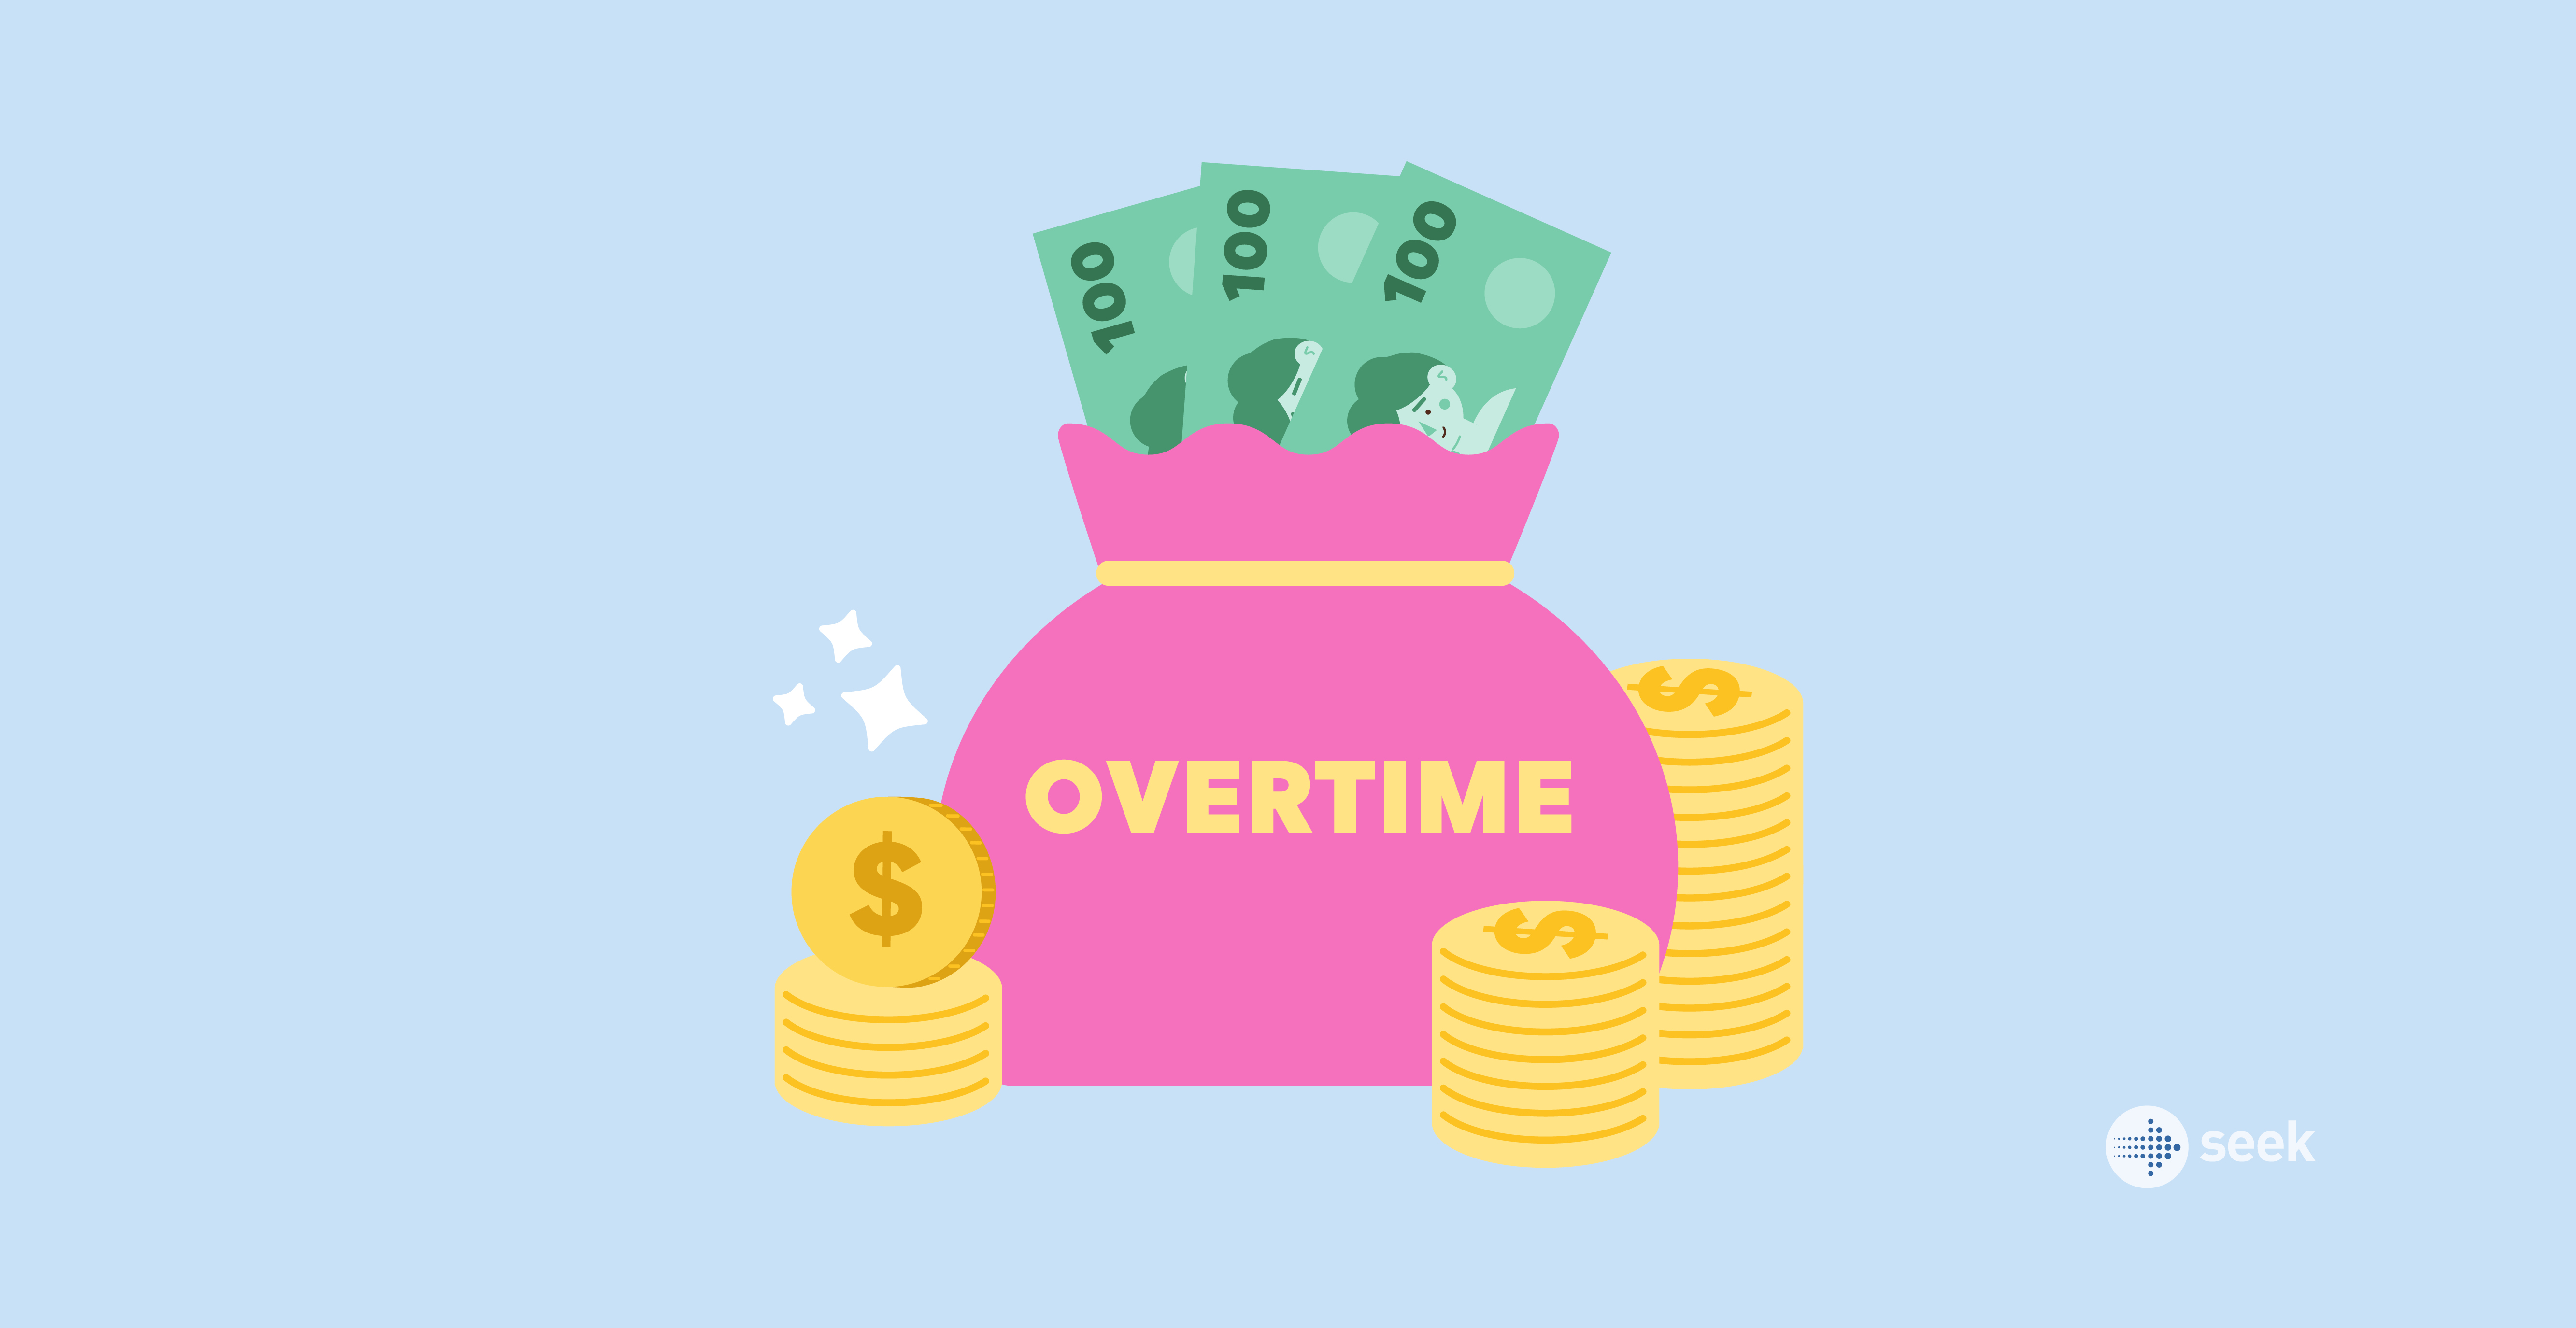 A guide to overtime pay